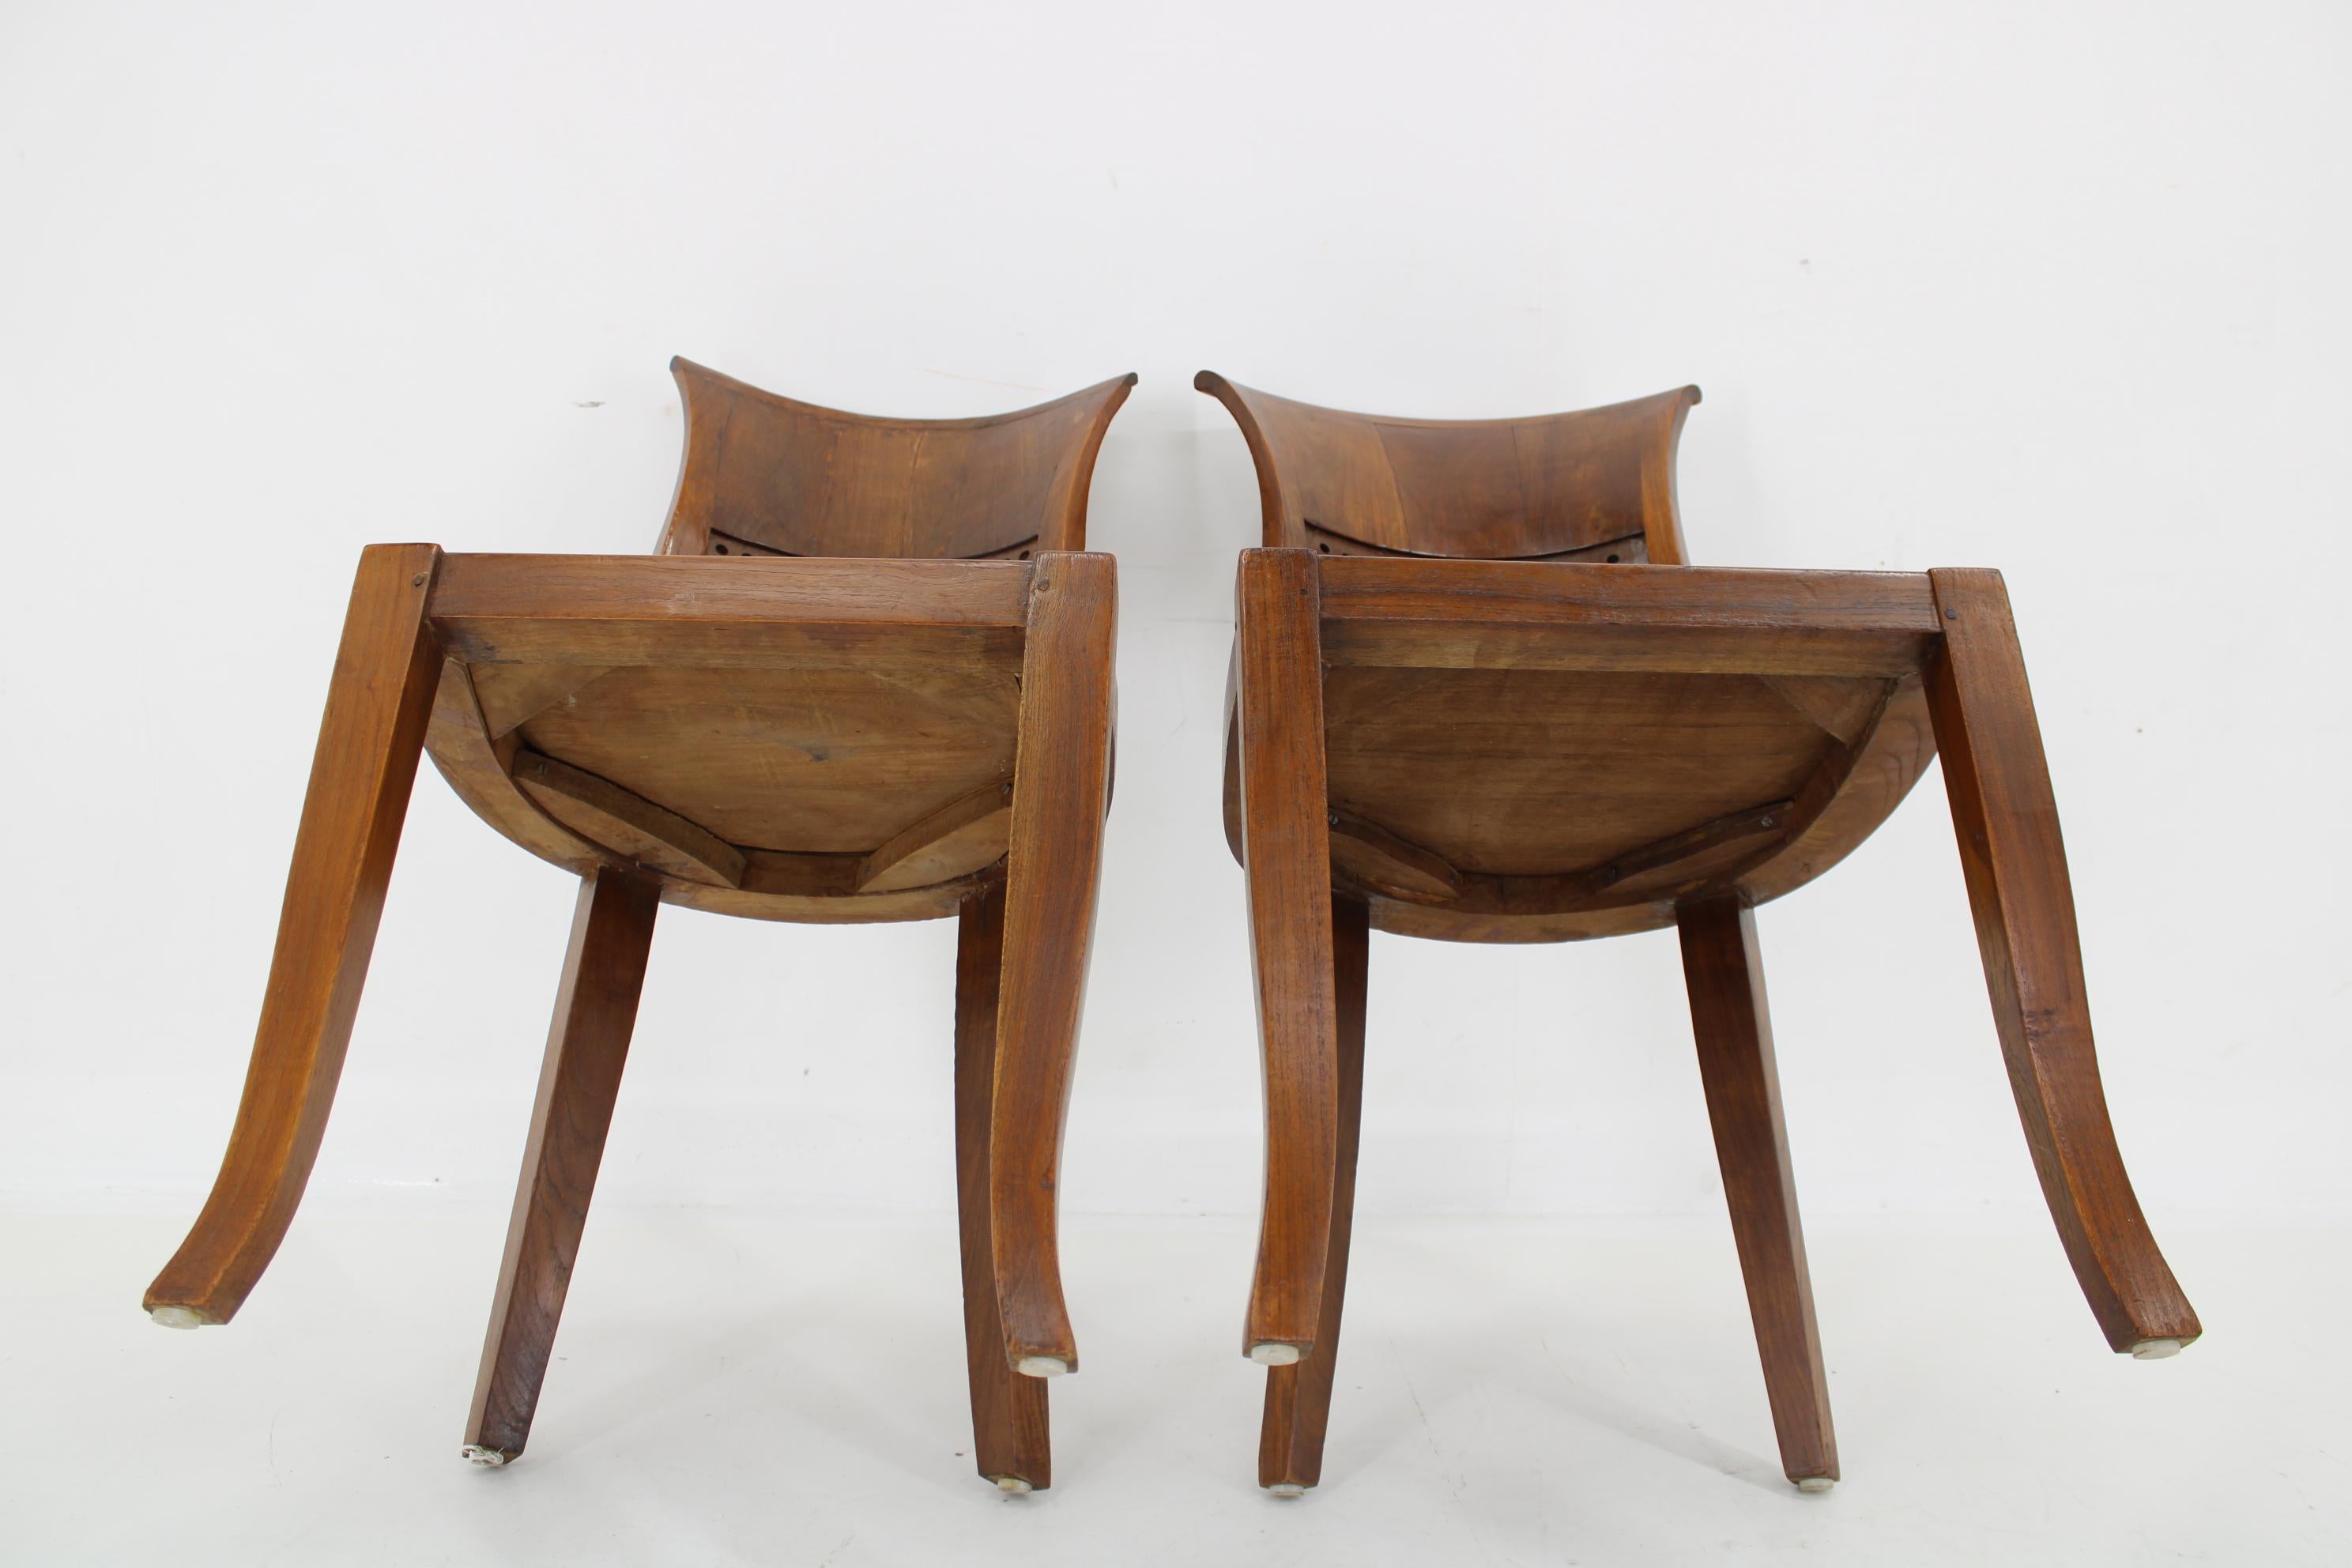  1980s Pair of Solid Teak Chairs, India  For Sale 7